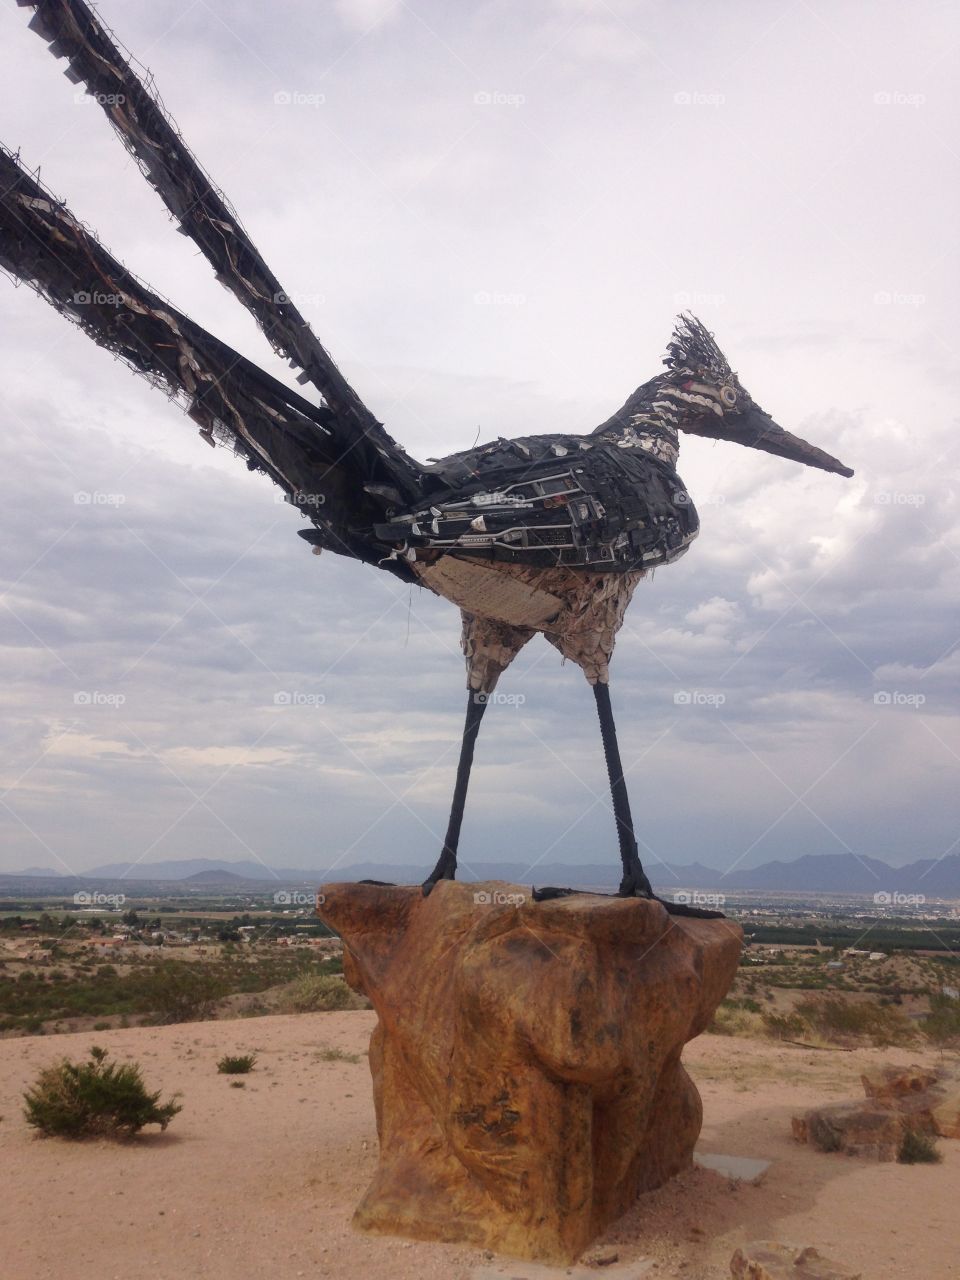 Recycled Roadrunner. On the outskirts of Las Cruces this sit on the side of the highway. It is made out of recycled materials. 